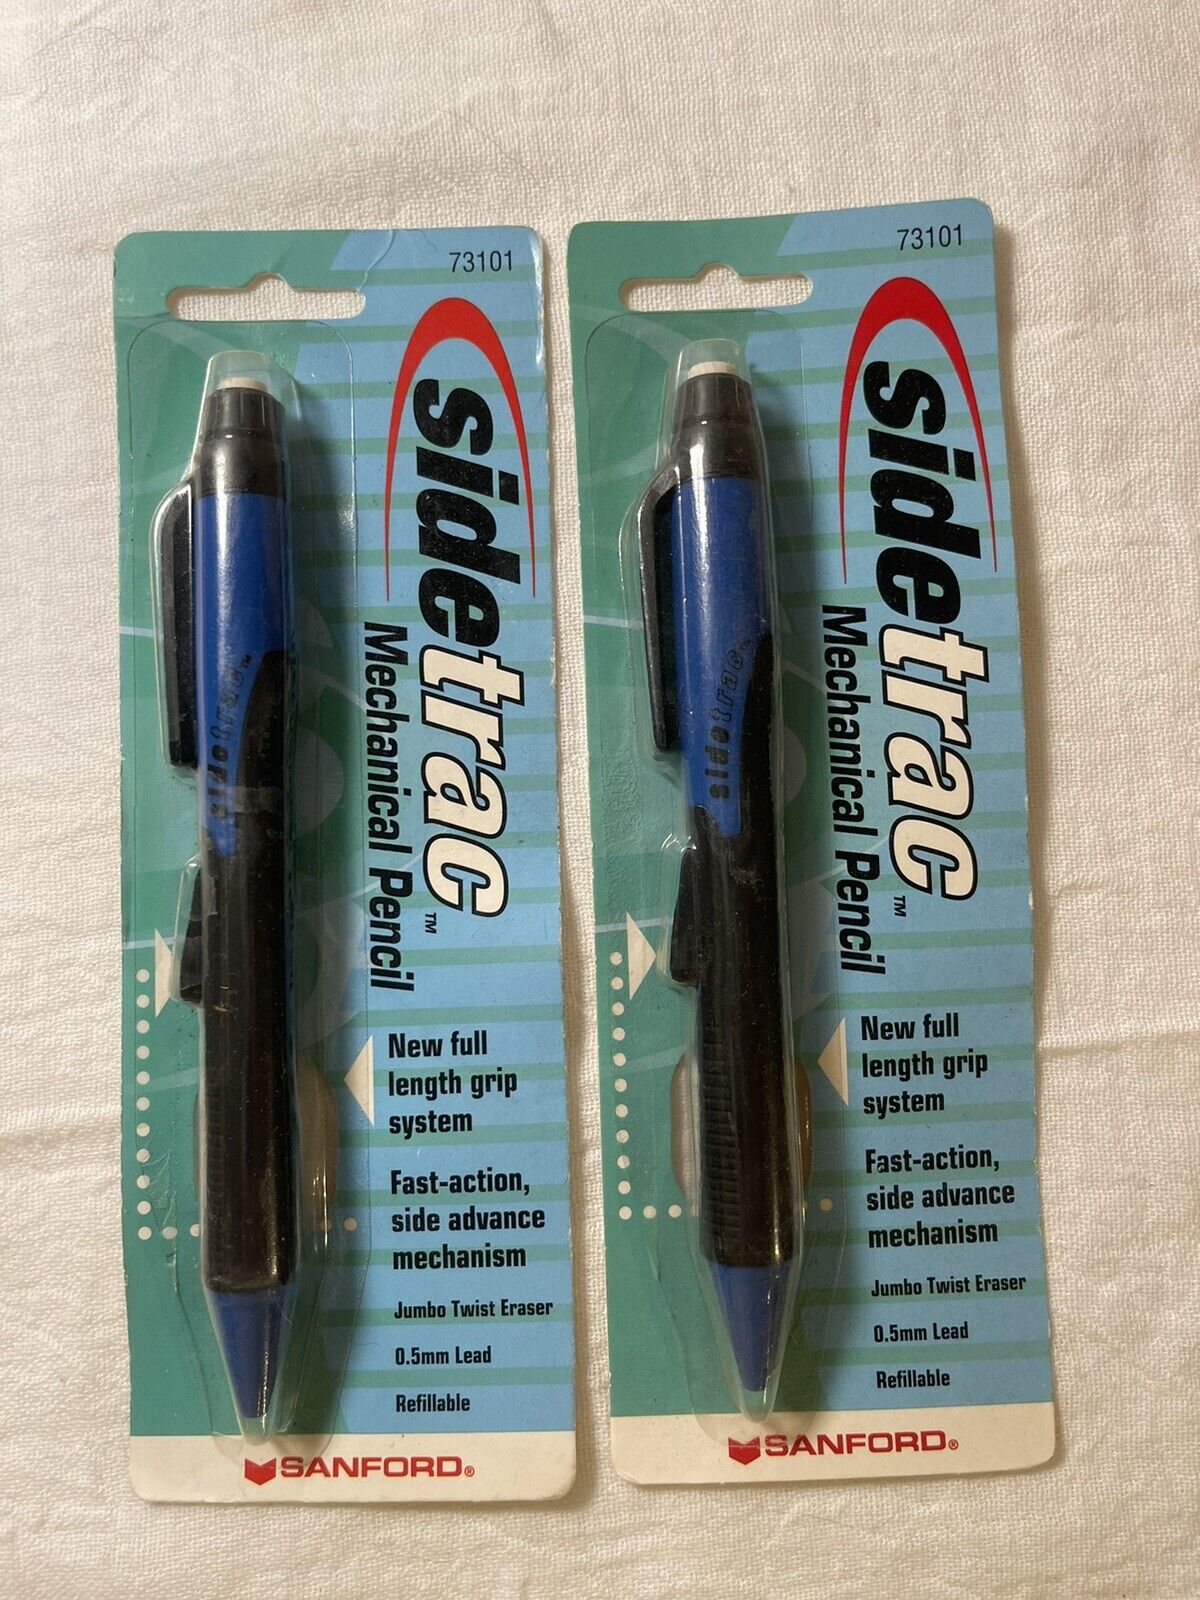 SANFORD Sidetrac Mechanical Pencils, 0.5mm, Lot Of 2, New (old Stock), Blue